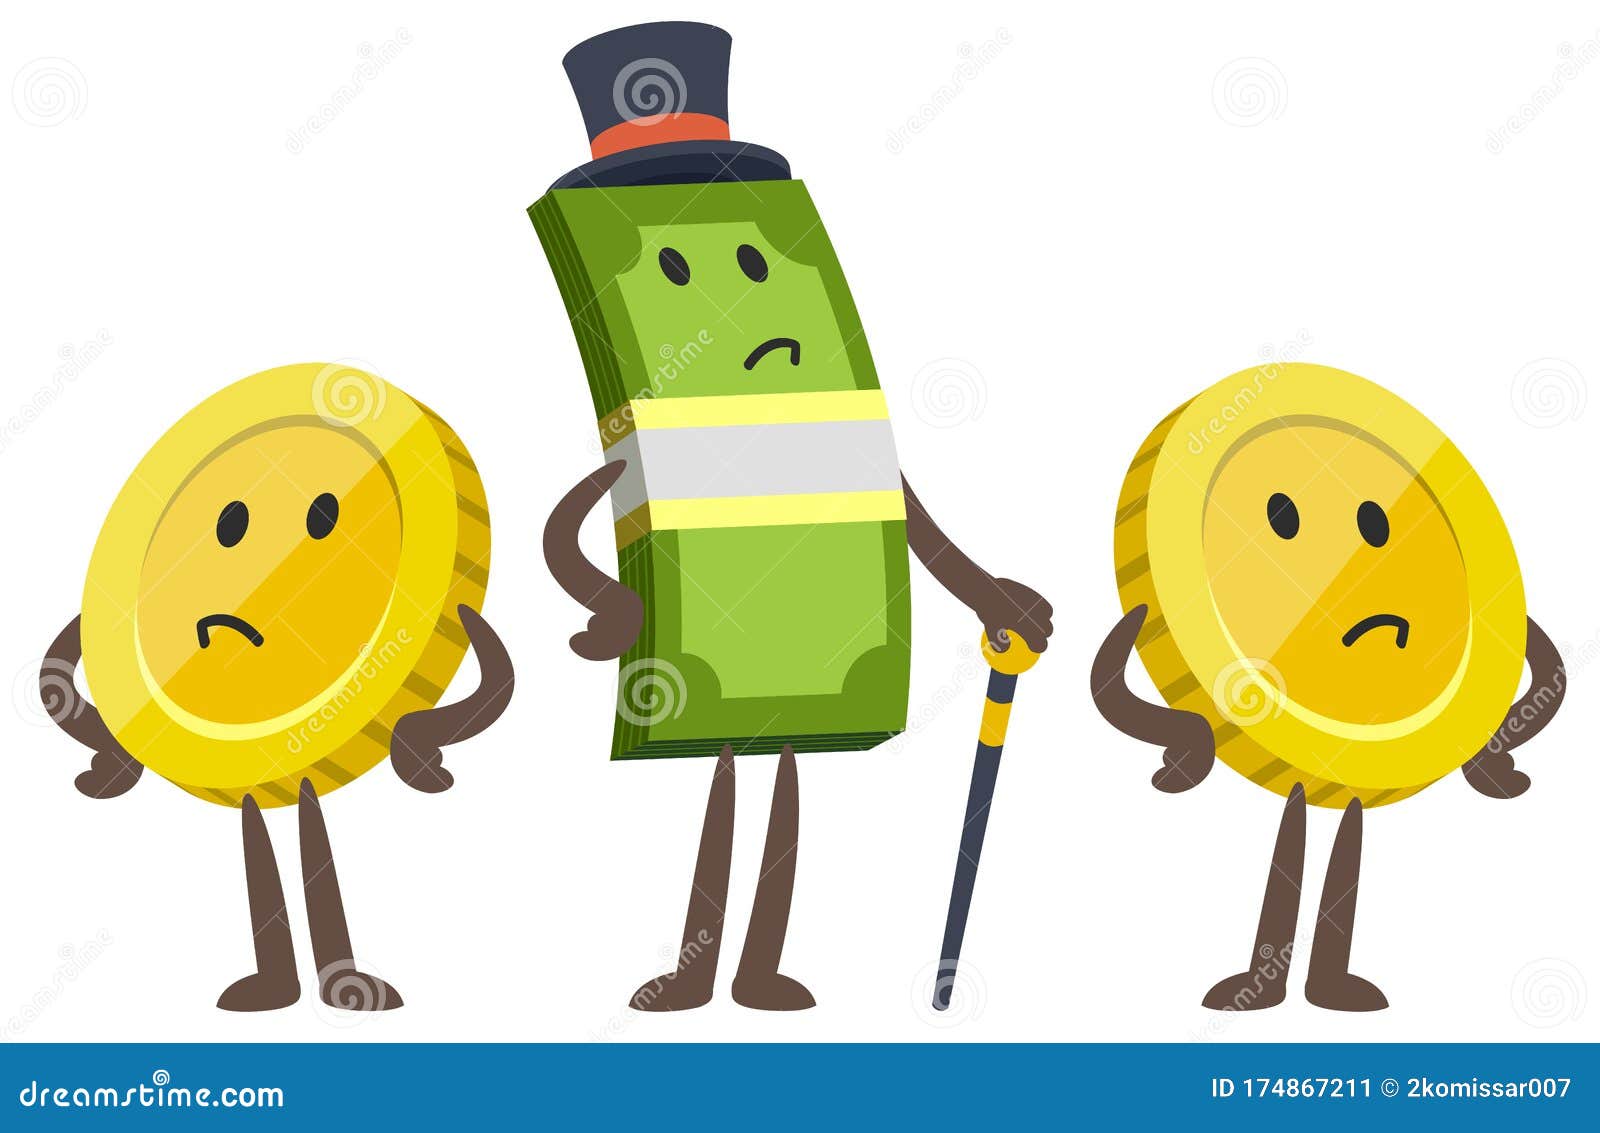 money character capitalist in a top hat with a cane. coin characters